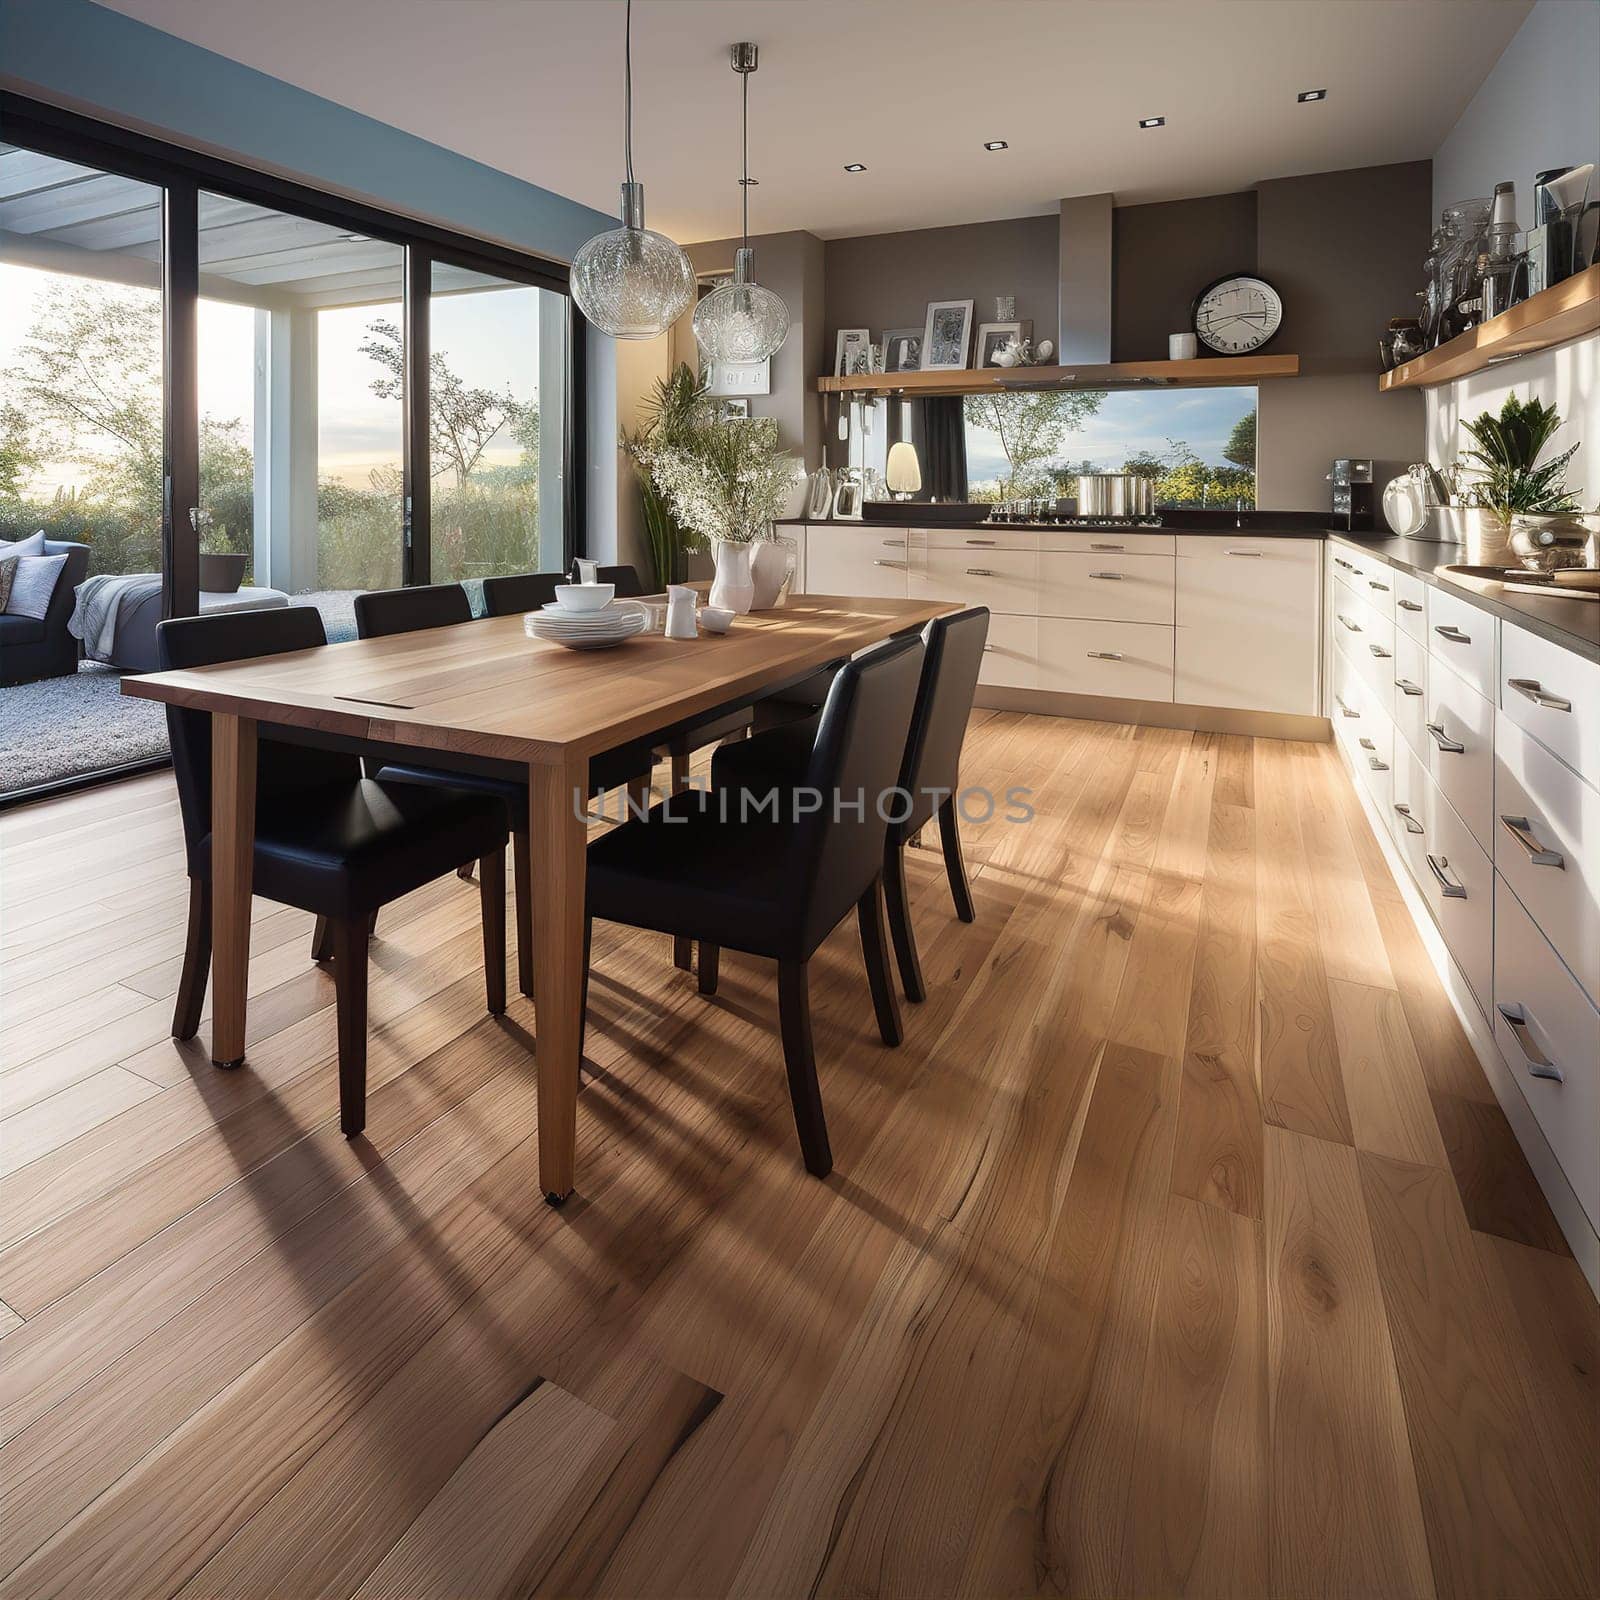 Table with chairs in stylish beautiful kitchen at home. Interior design concept. AI generated